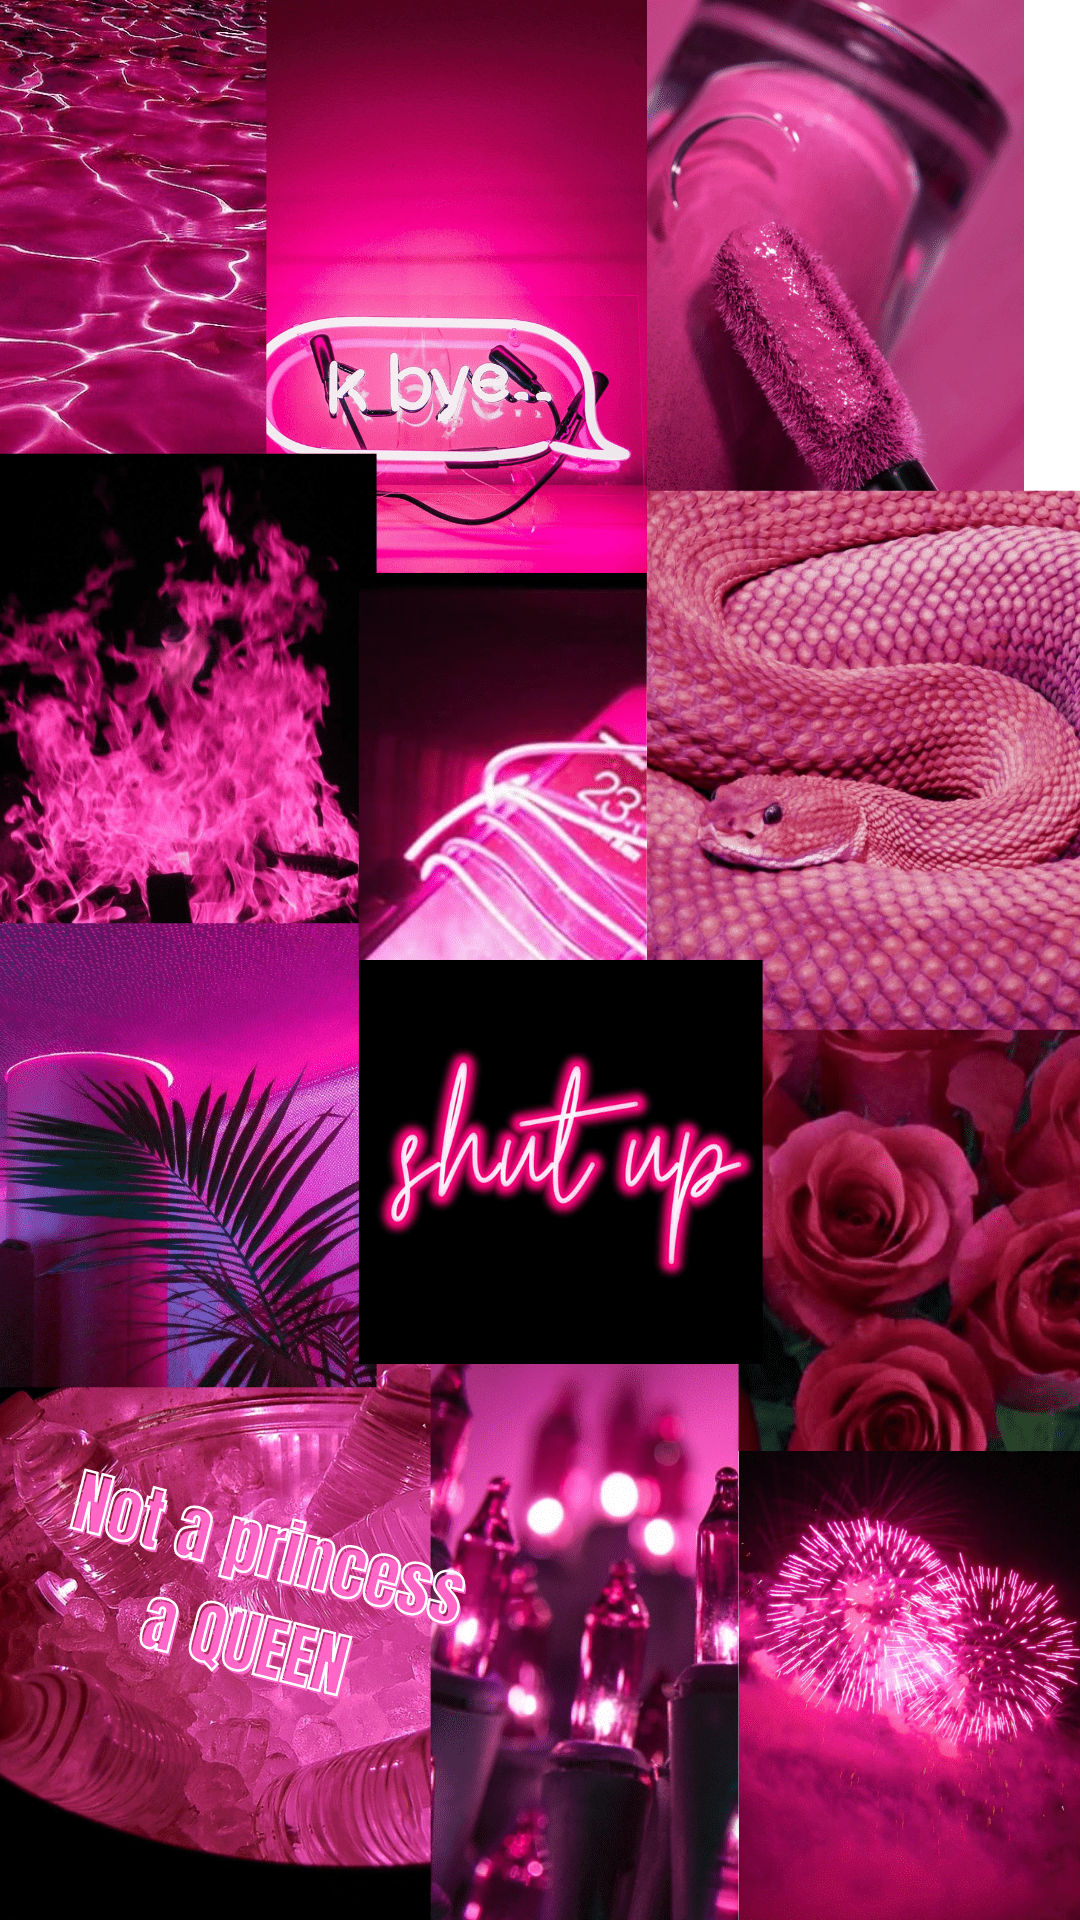 Aesthetic pink collage background - Pink, cool